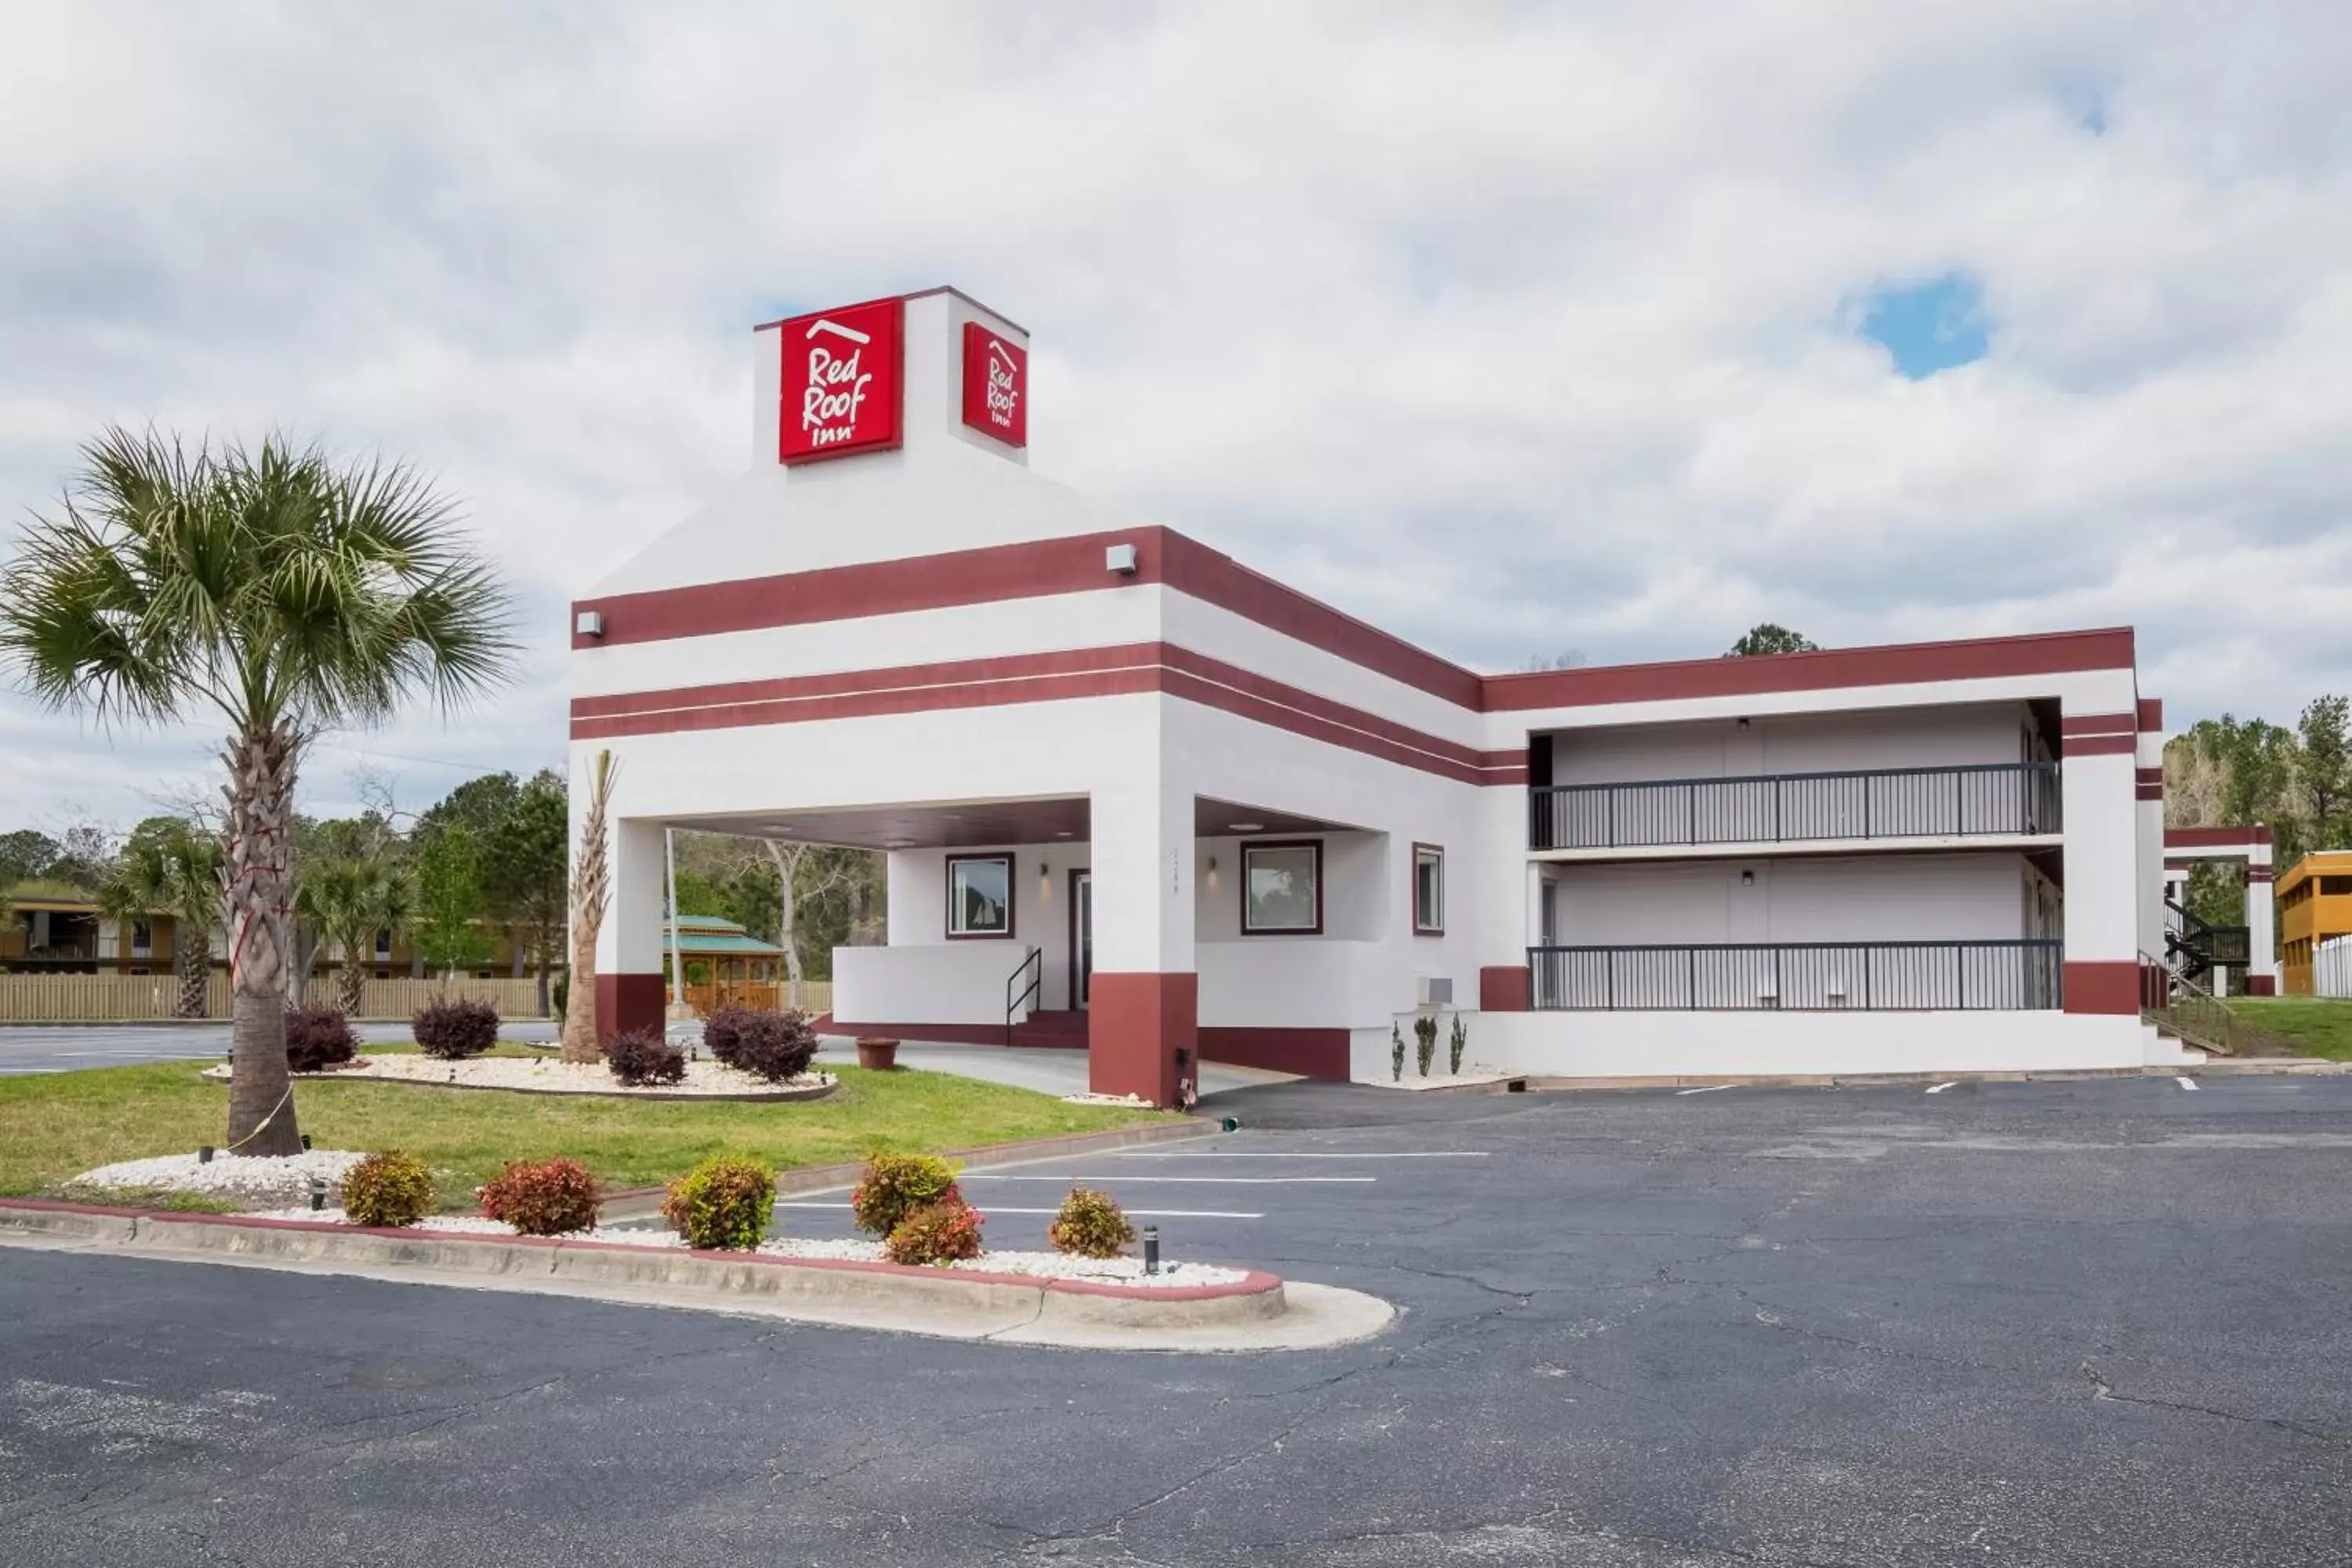 Property Building in Red Roof Inn Walterboro